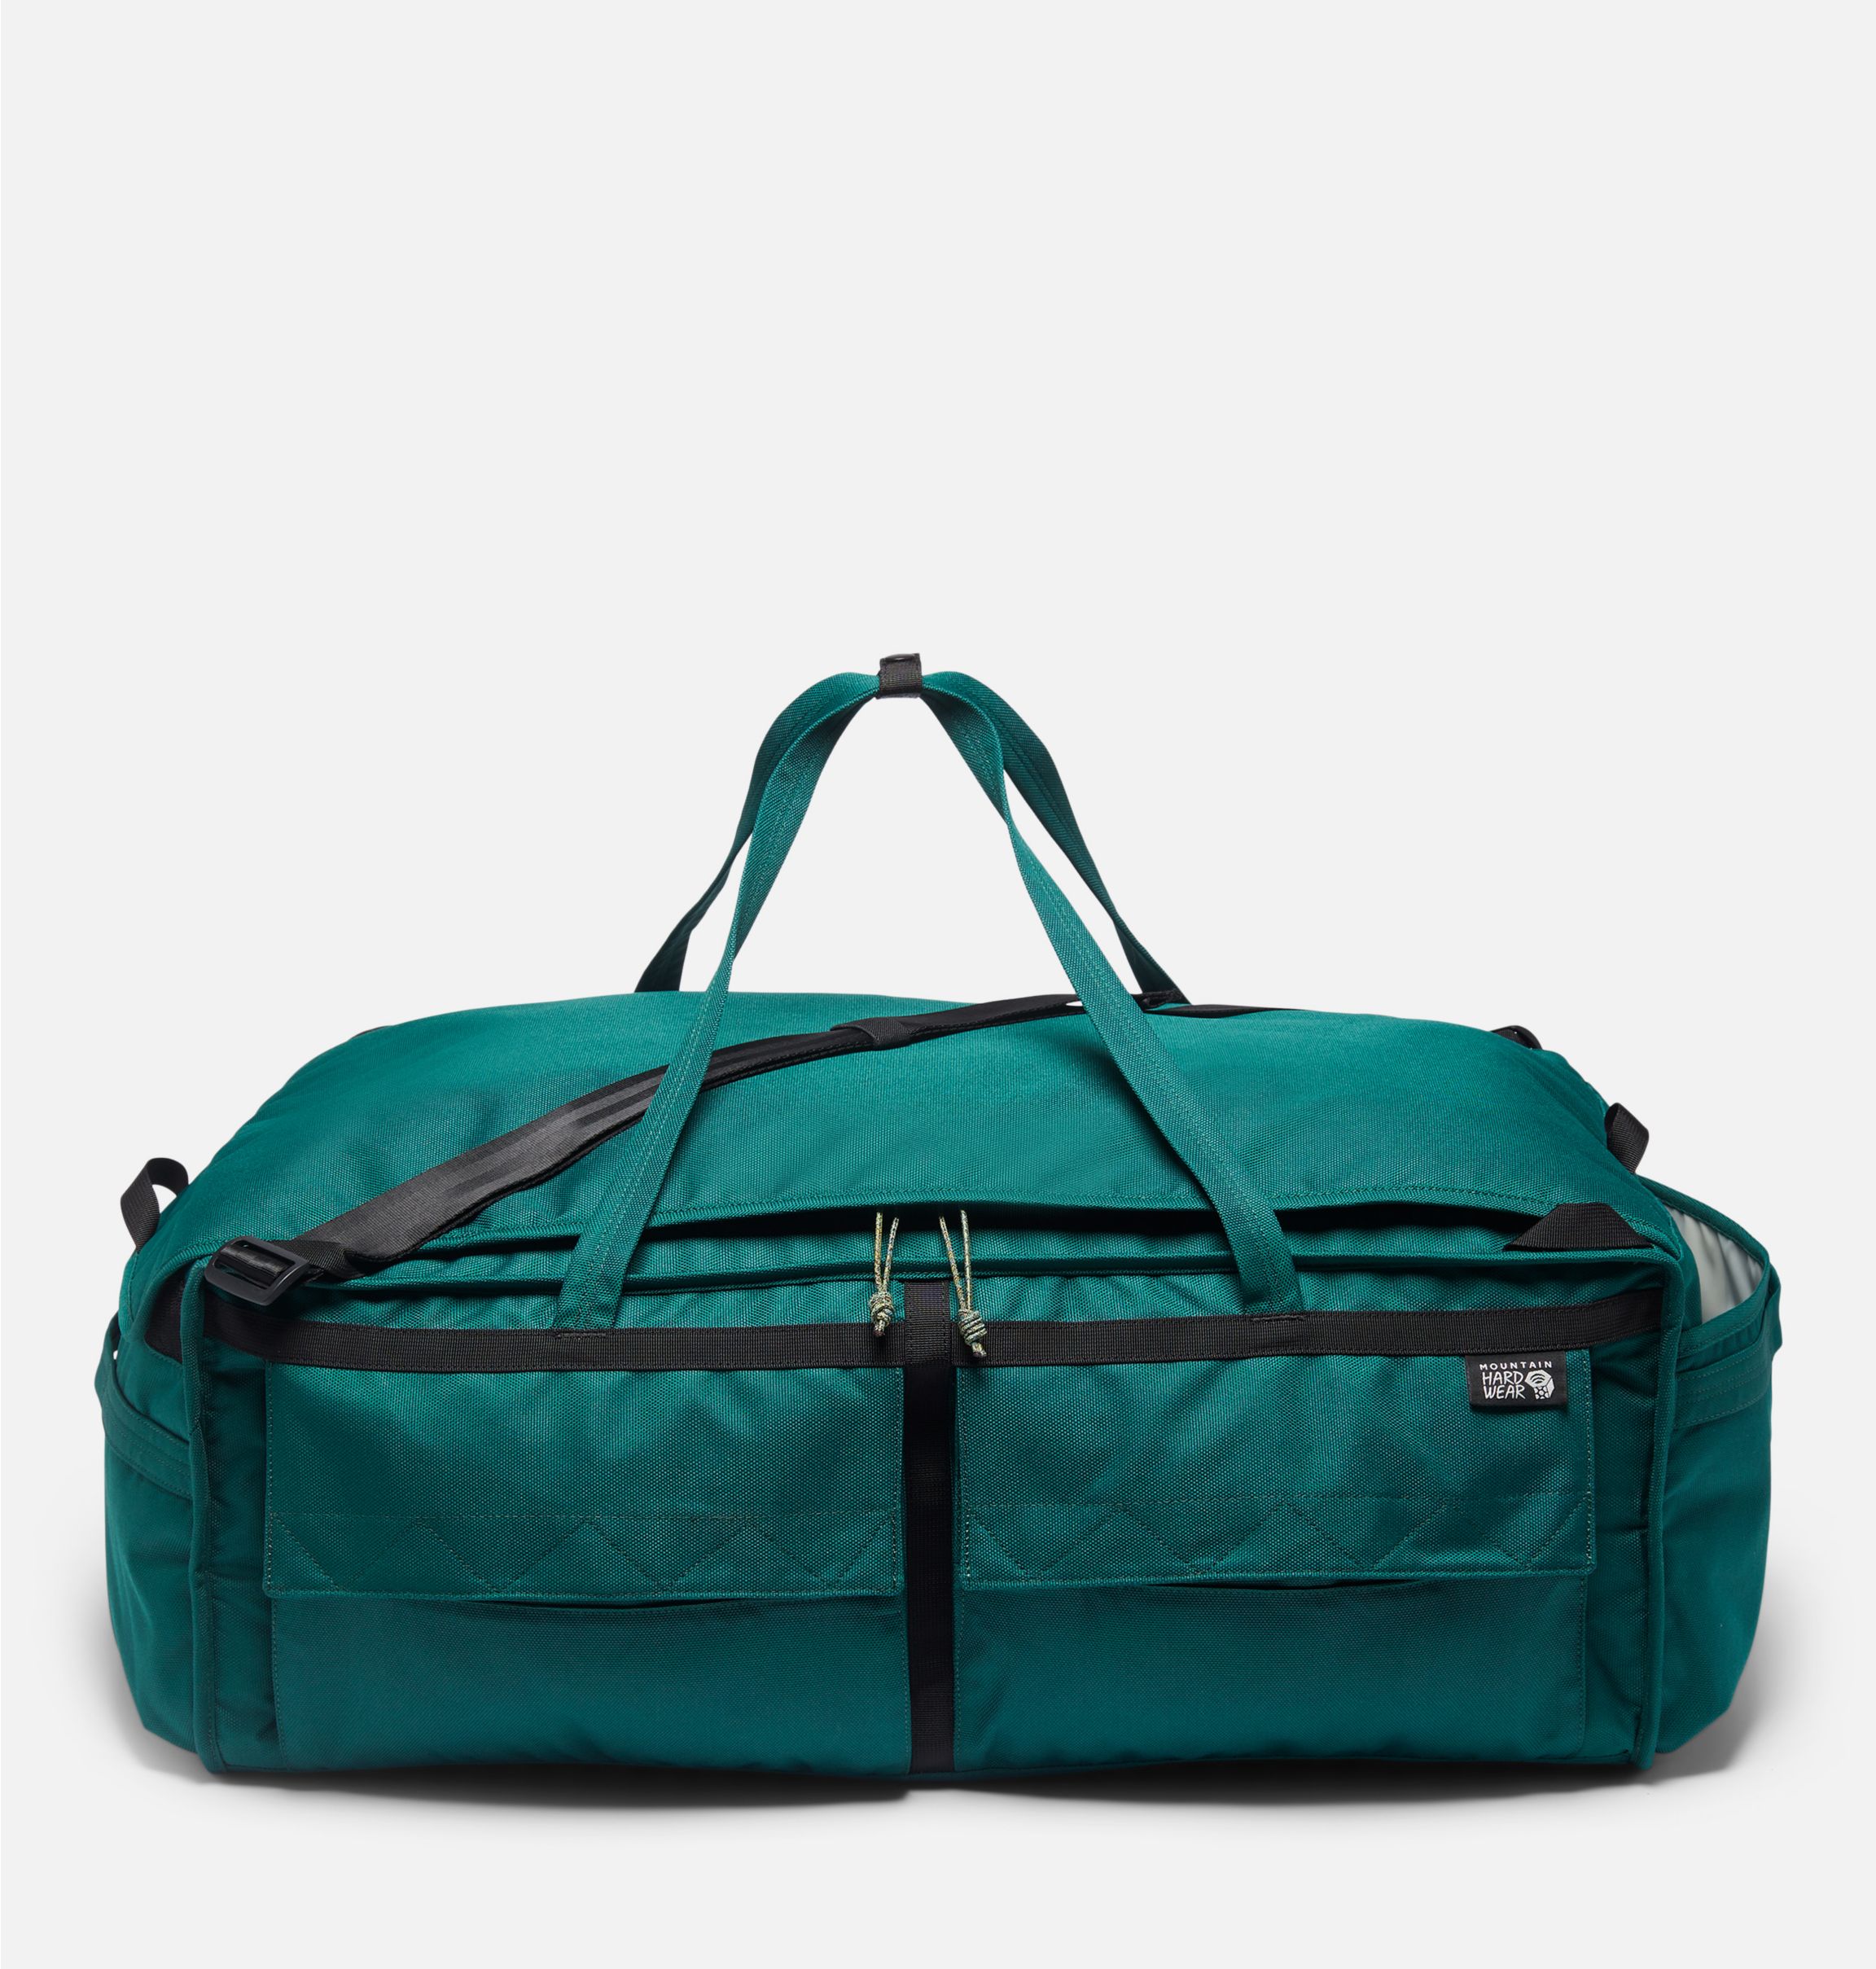 Large Duffle Bag - Outdoor gear - Camping Accessories - The Bush Company 